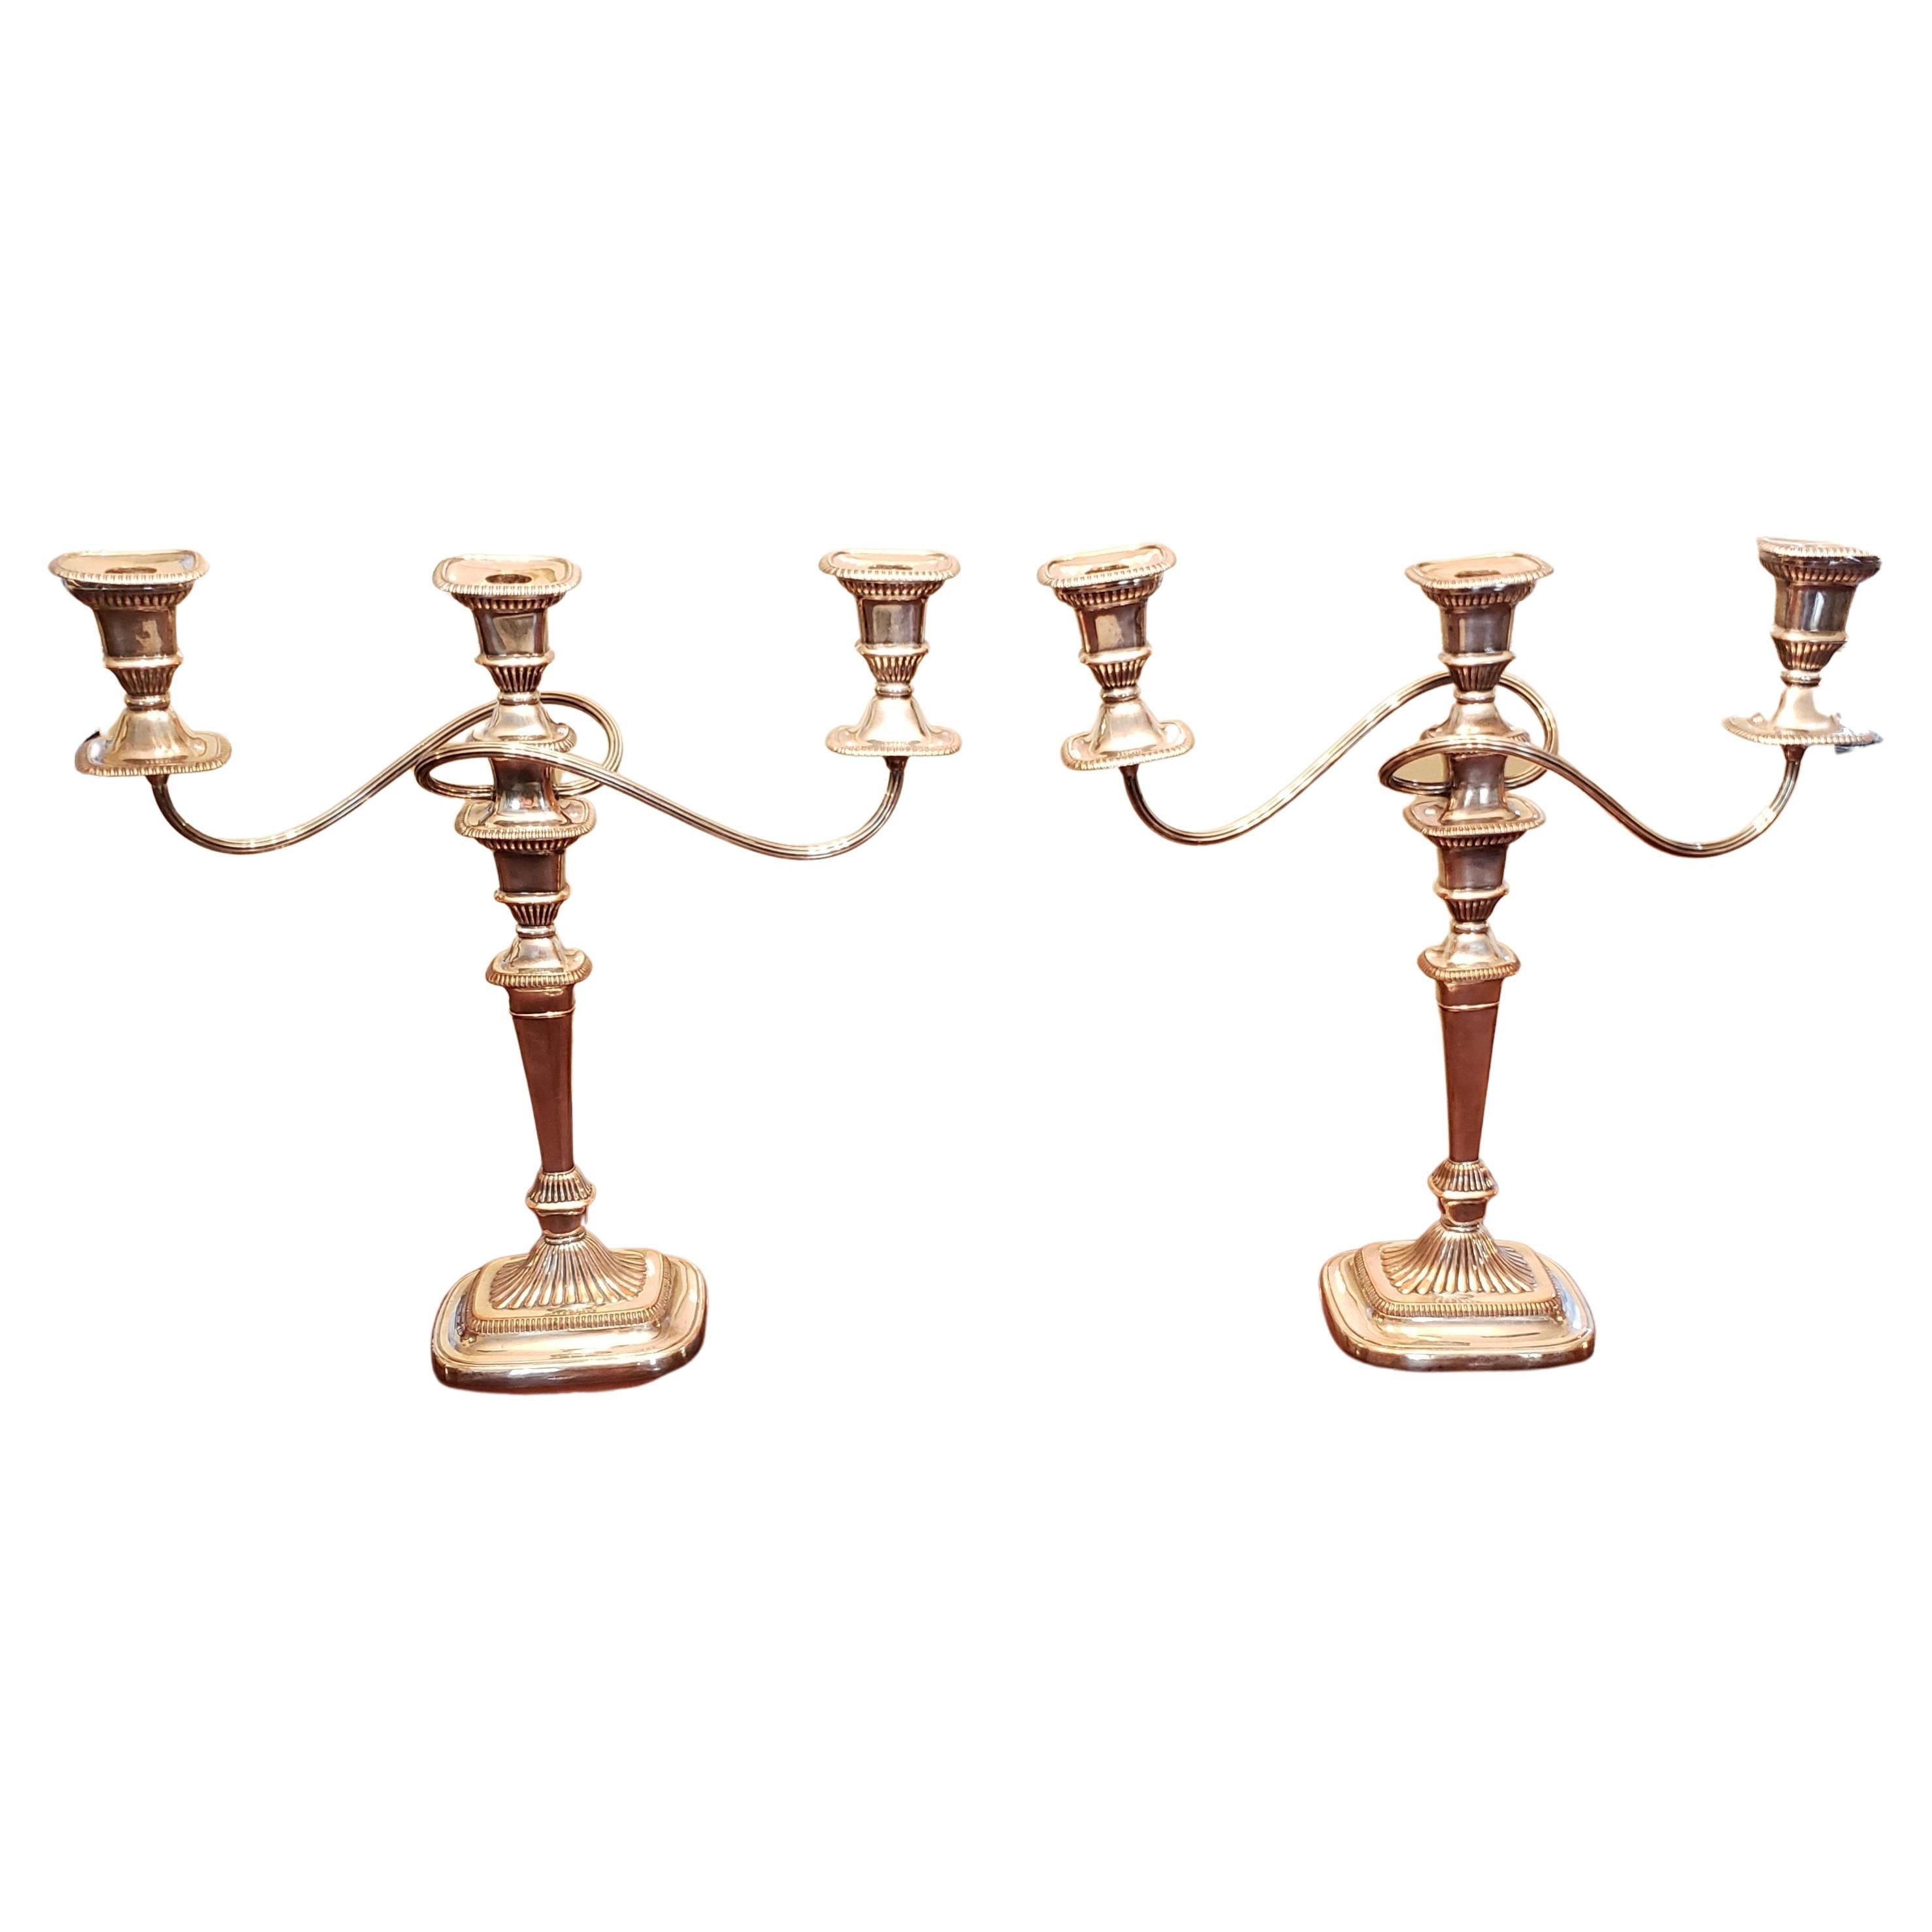 English Pair of Sheffield Silverplated Convertible Three Light Candelabras, Circa 1840s For Sale